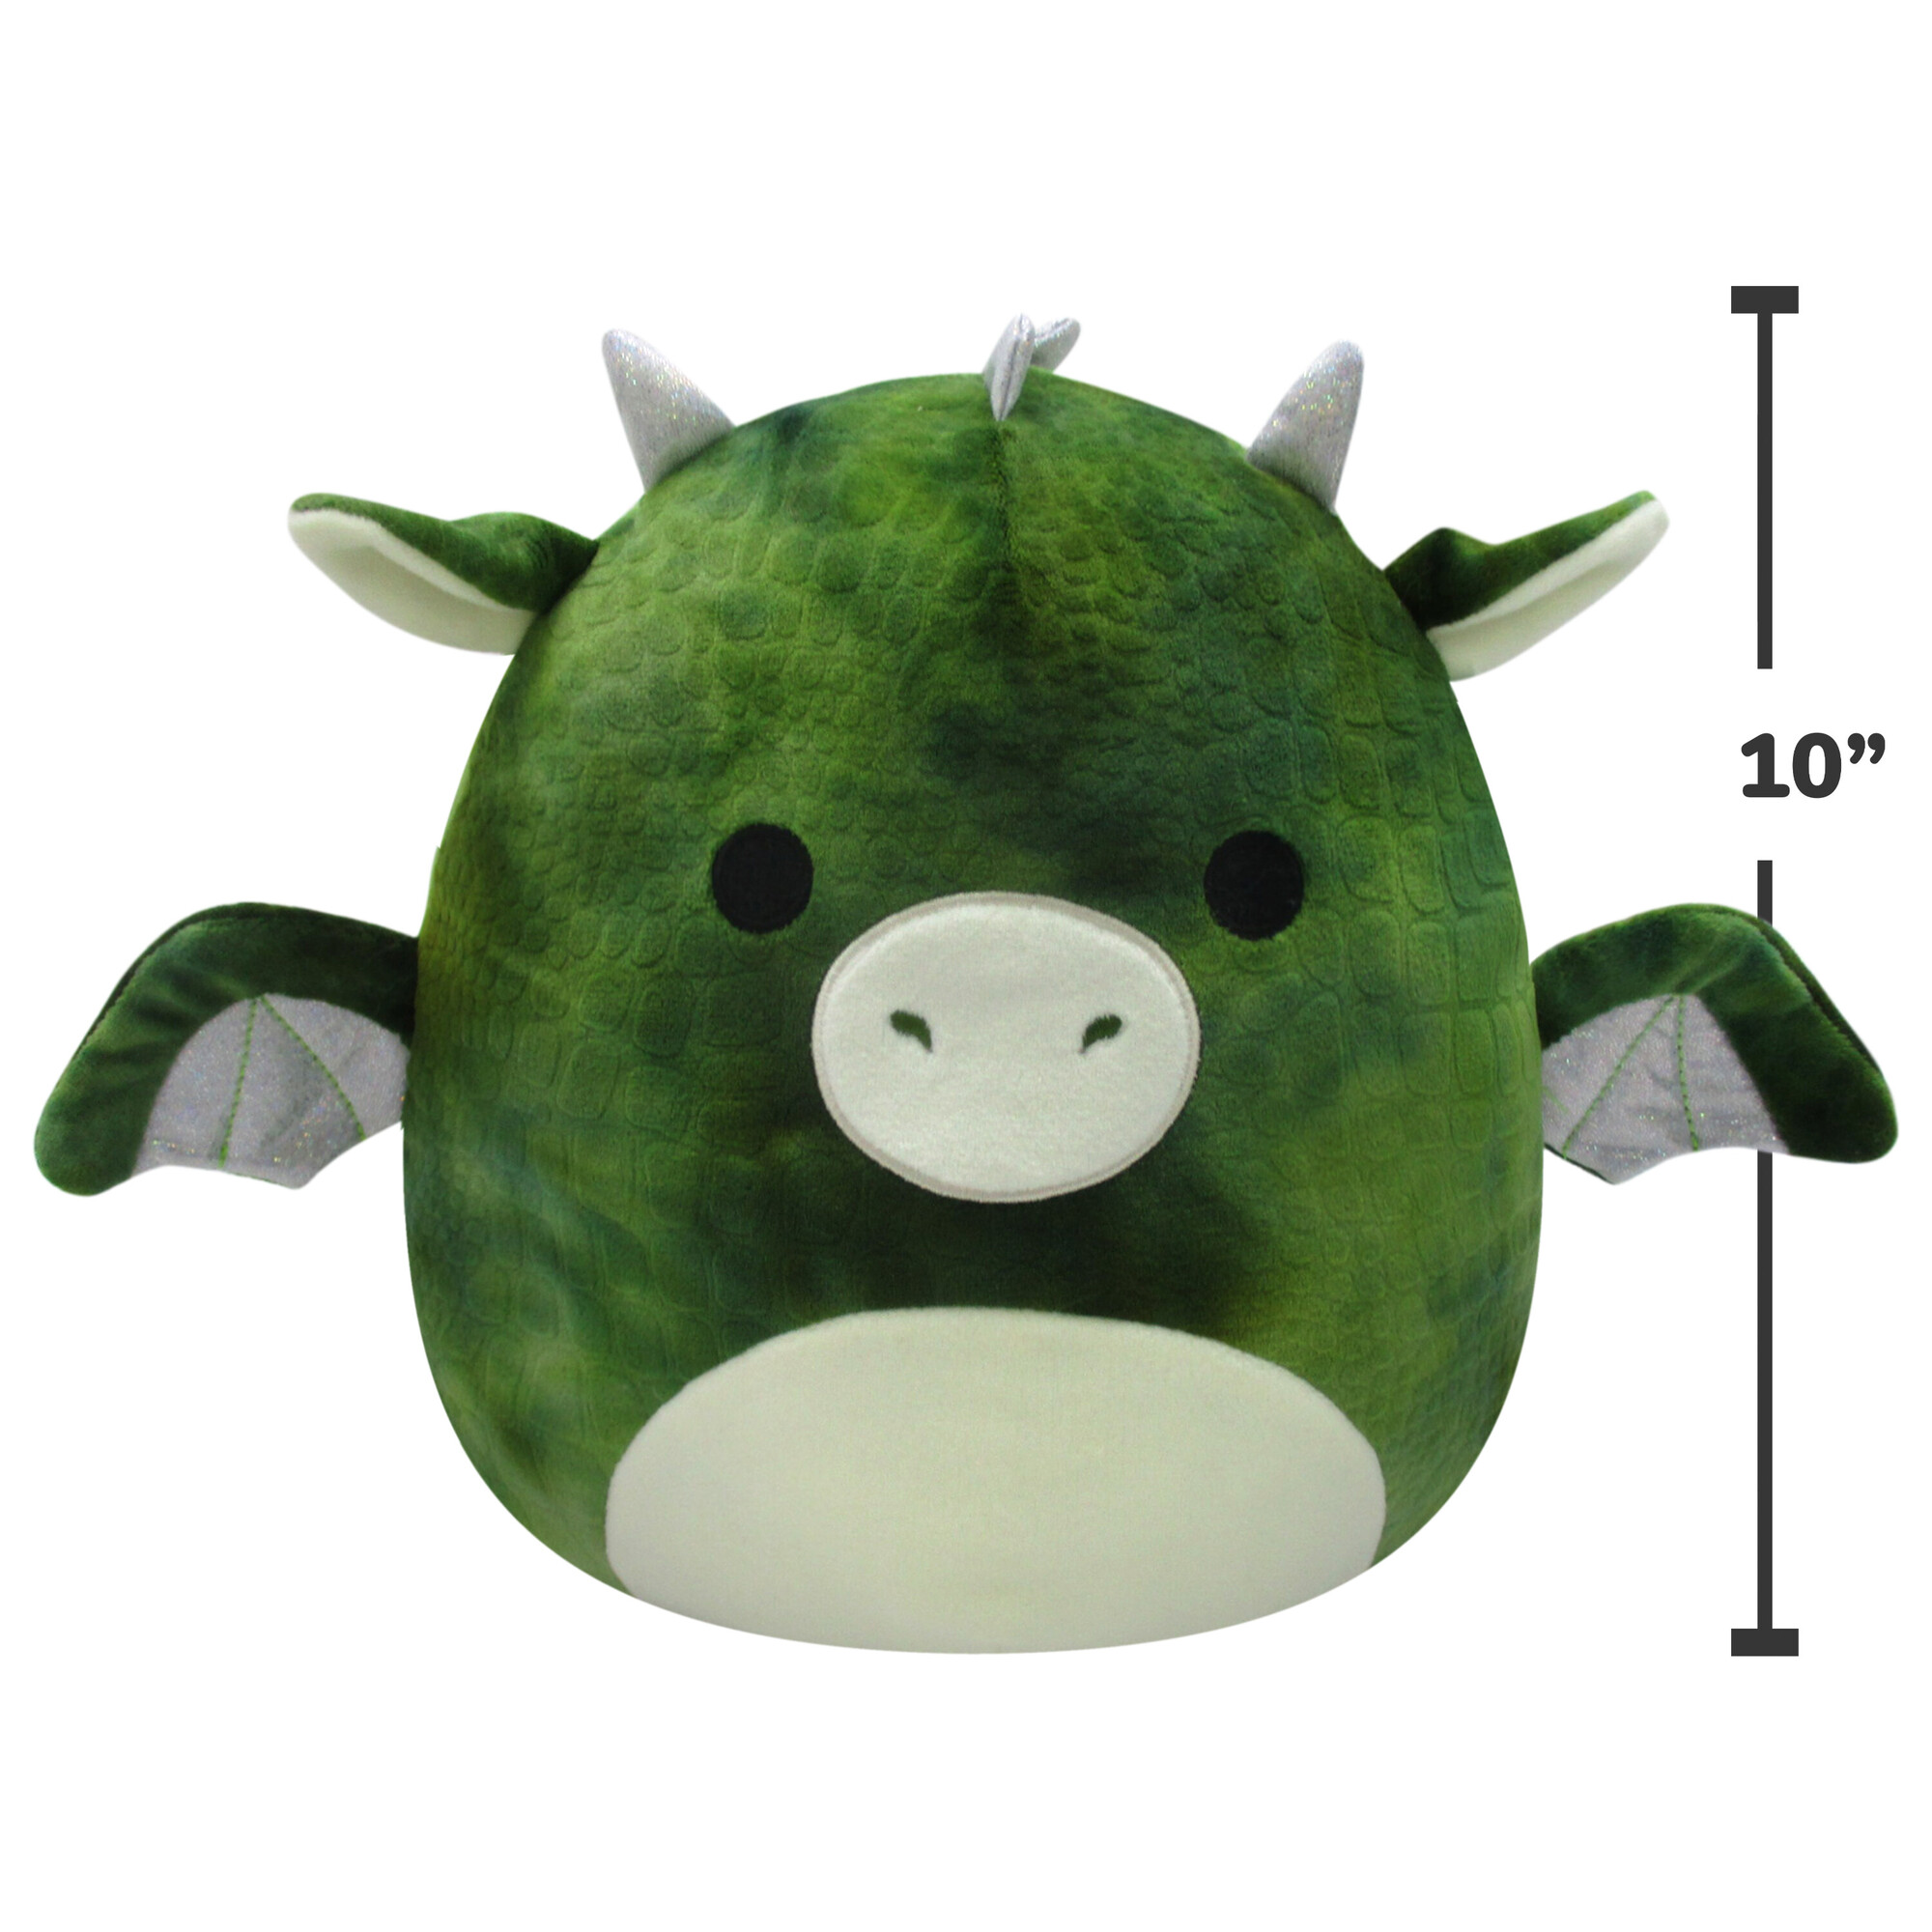 Squishmallows 10 inch Duke the Green Textured Dragon with Silver Horns - Child's Ultra Soft Stuffed Plush Toy - image 2 of 7